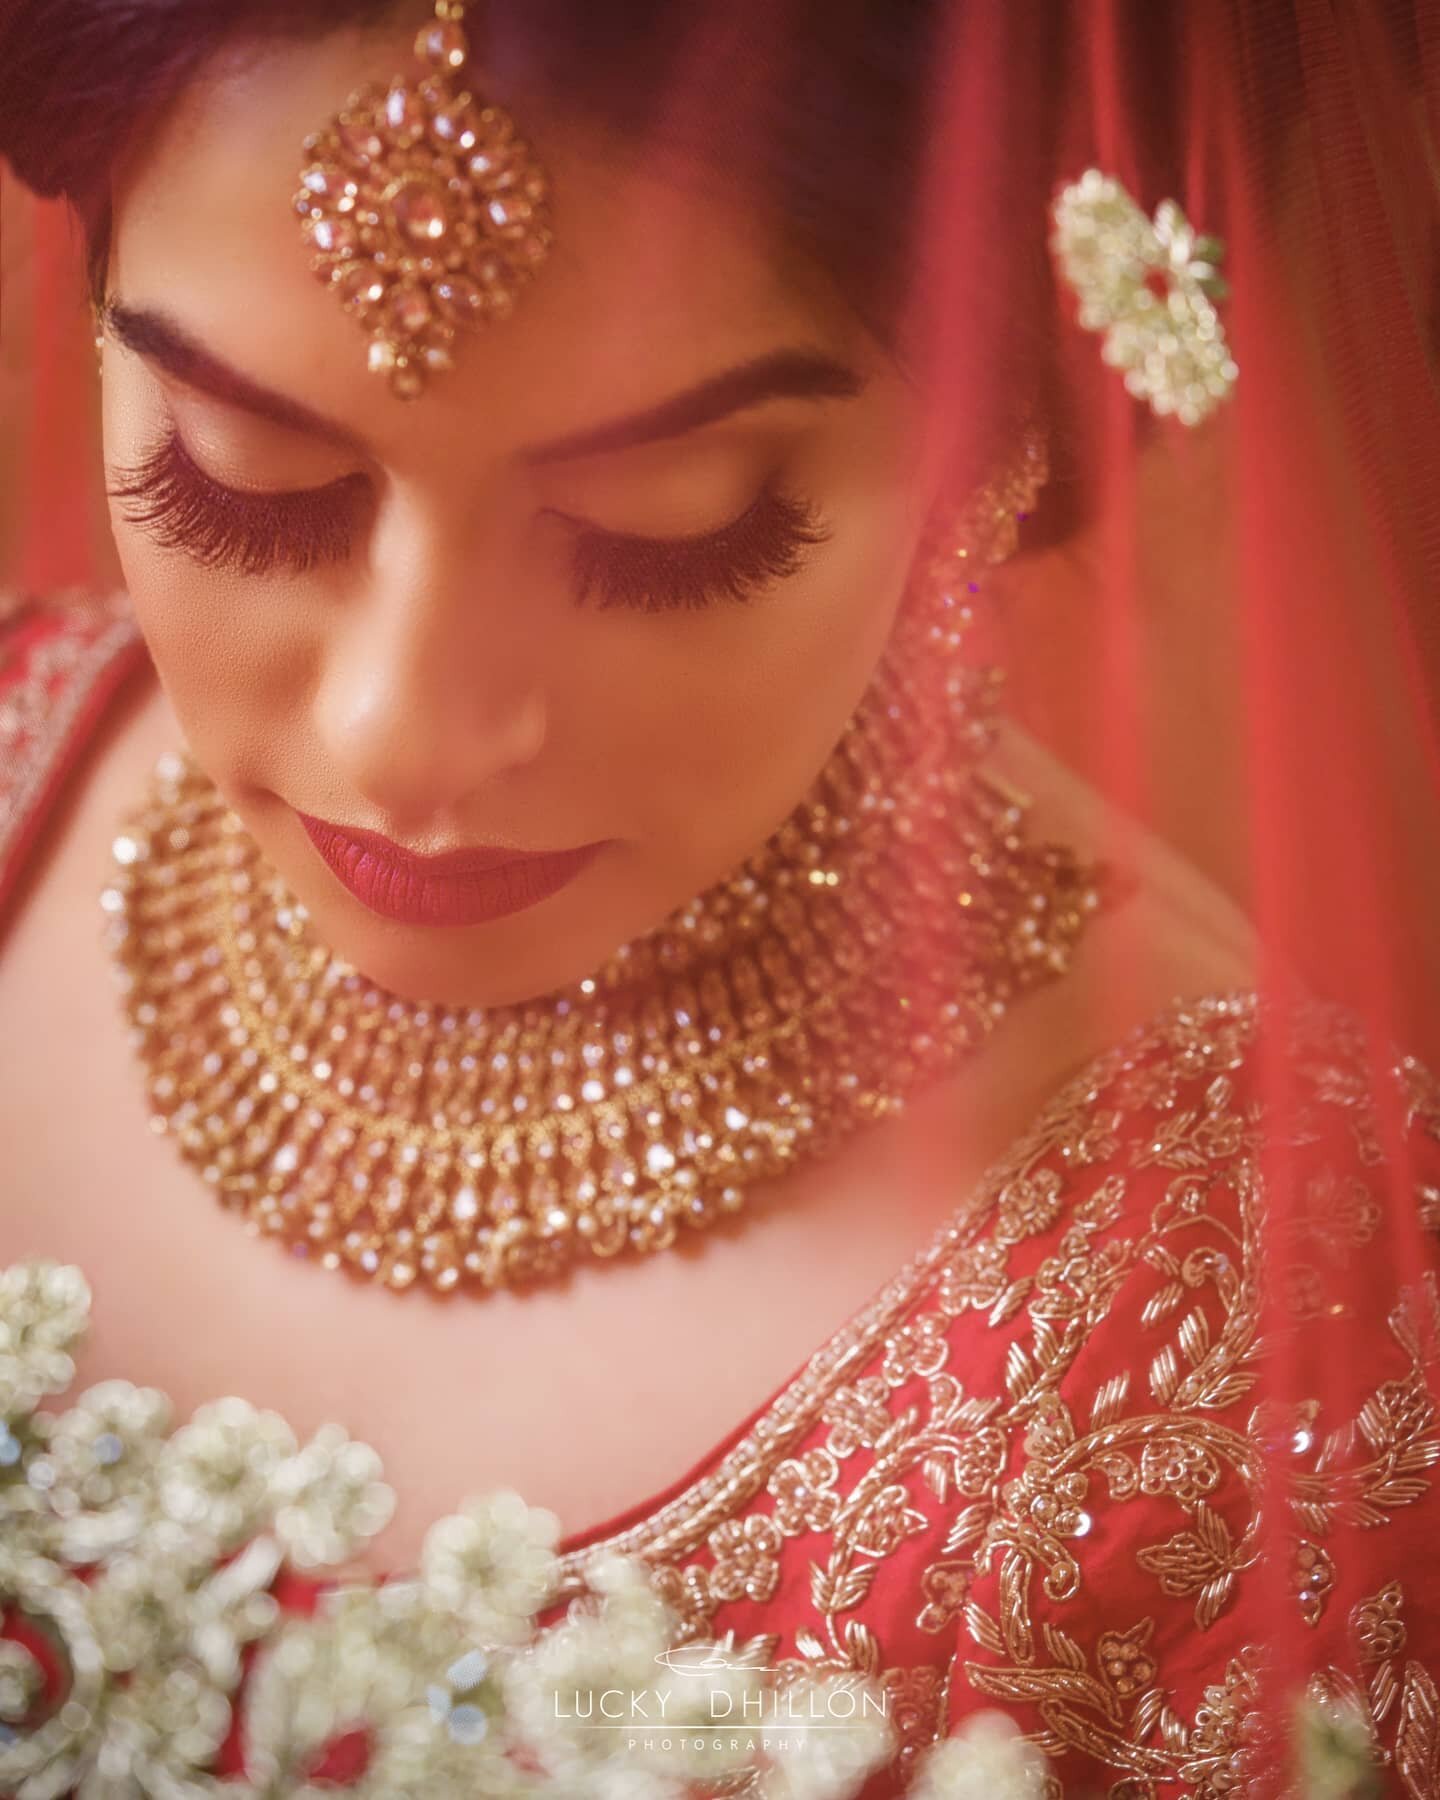 A portrait of Raj on her wedding morning. This one taken only moments before being on route to the Sikh temple. I can't wait to share more from this beautiful wedding.

Hair and makeup - @harveys_bridal_academy_ 

www.luckydhillon.com
#luckydhillonph